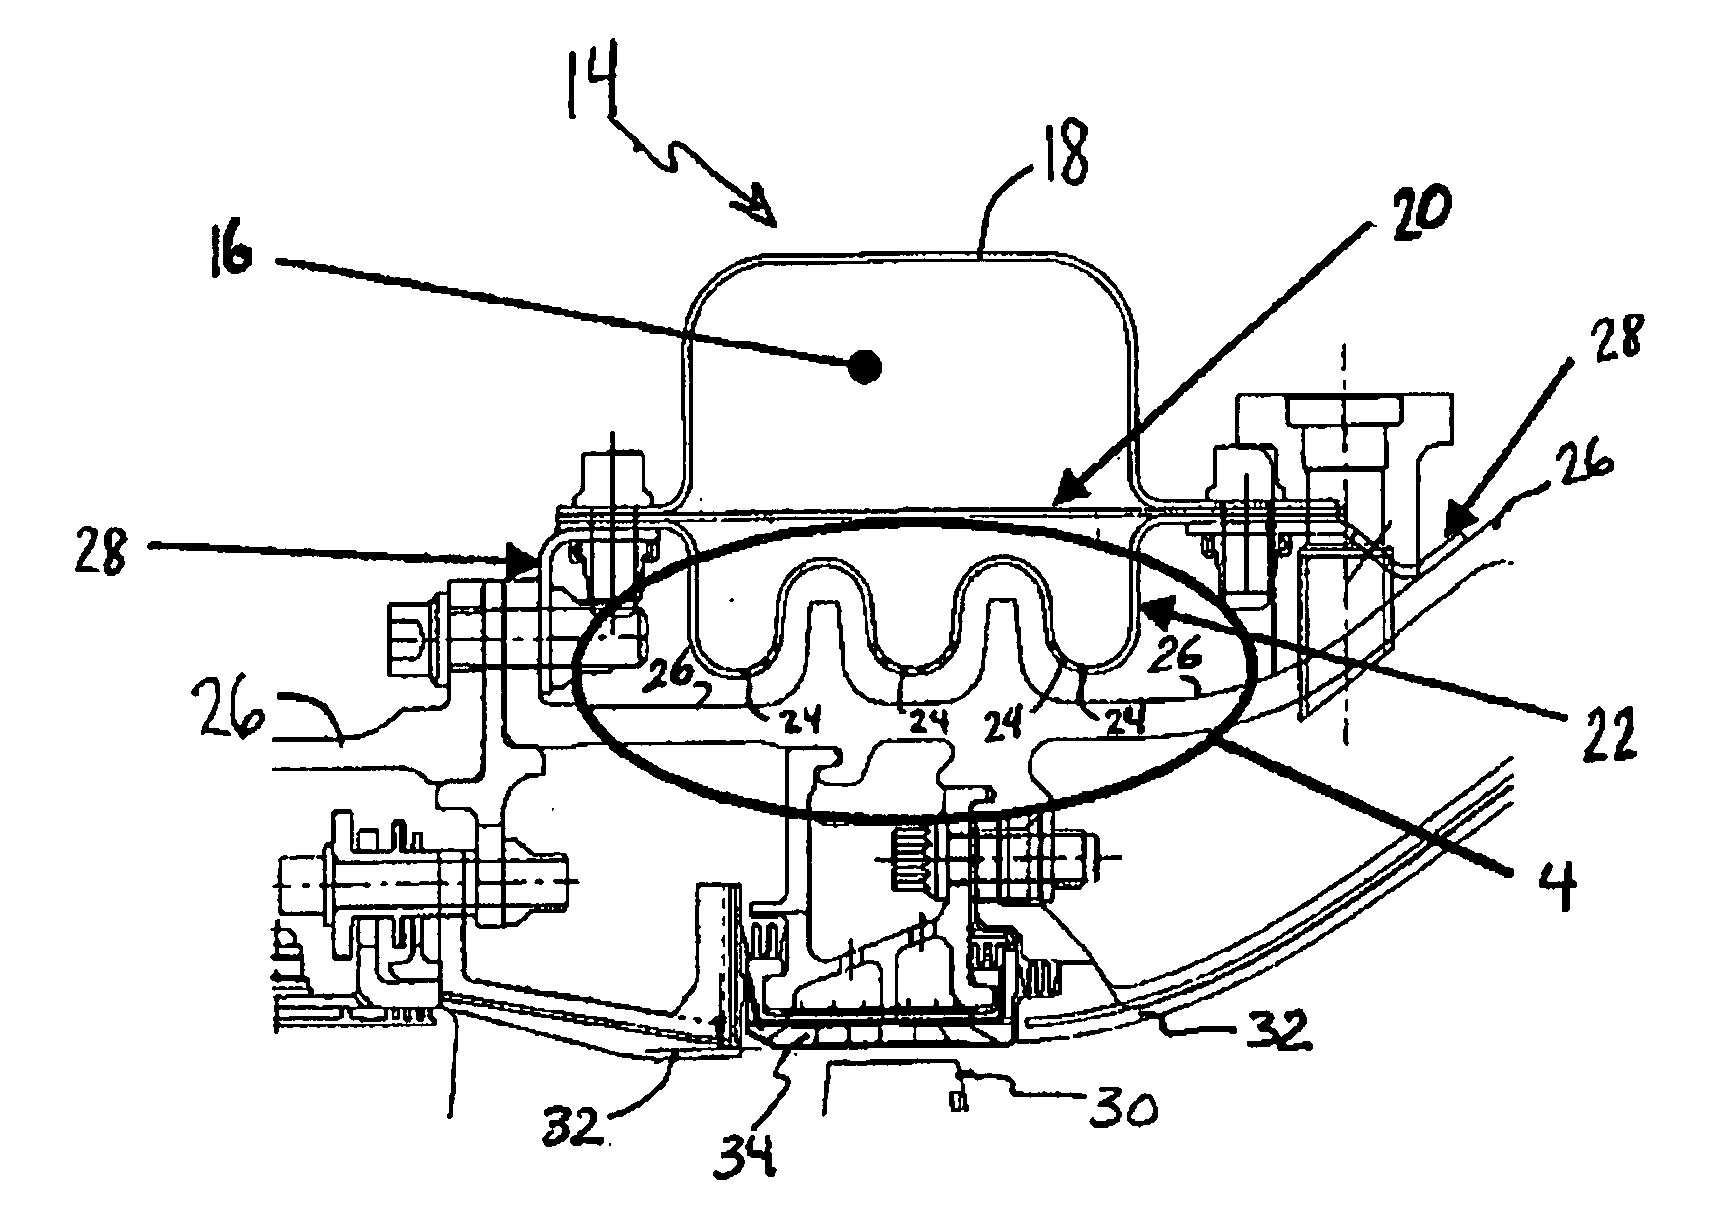 Active clearance control system for gas turbine engines